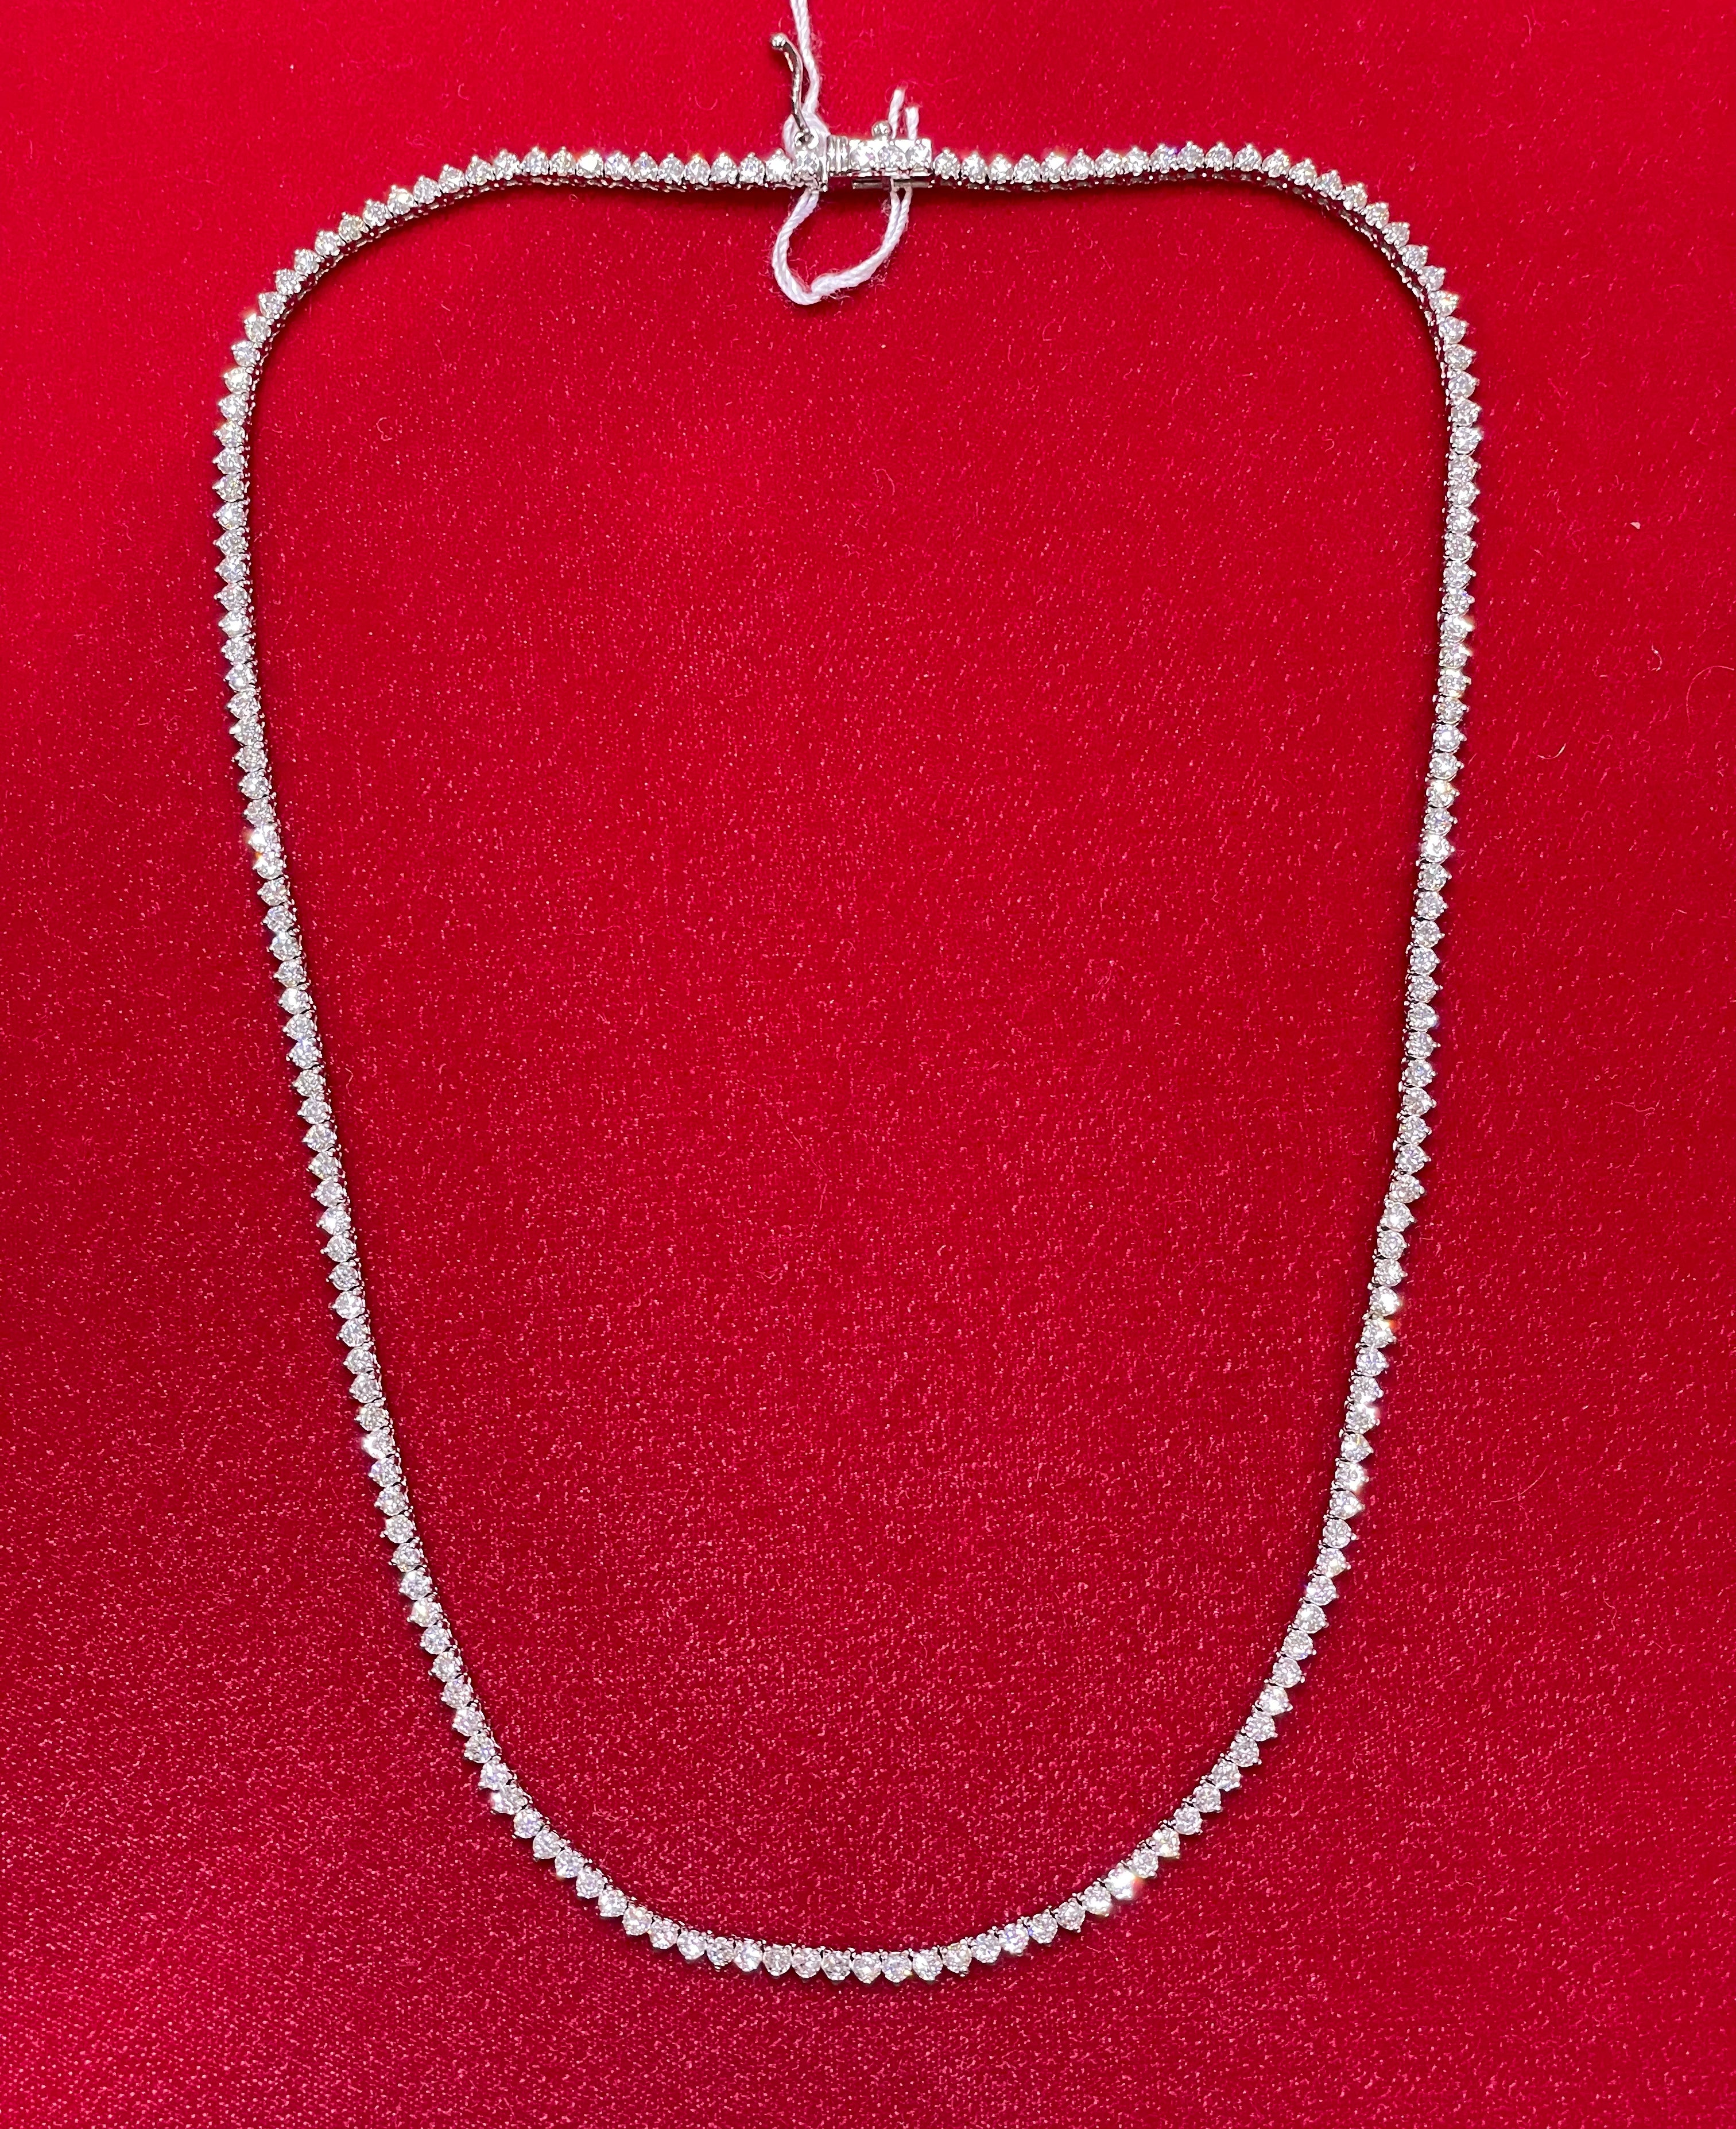 5.7CT Riviera Necklace 14k White Gold 16” Long